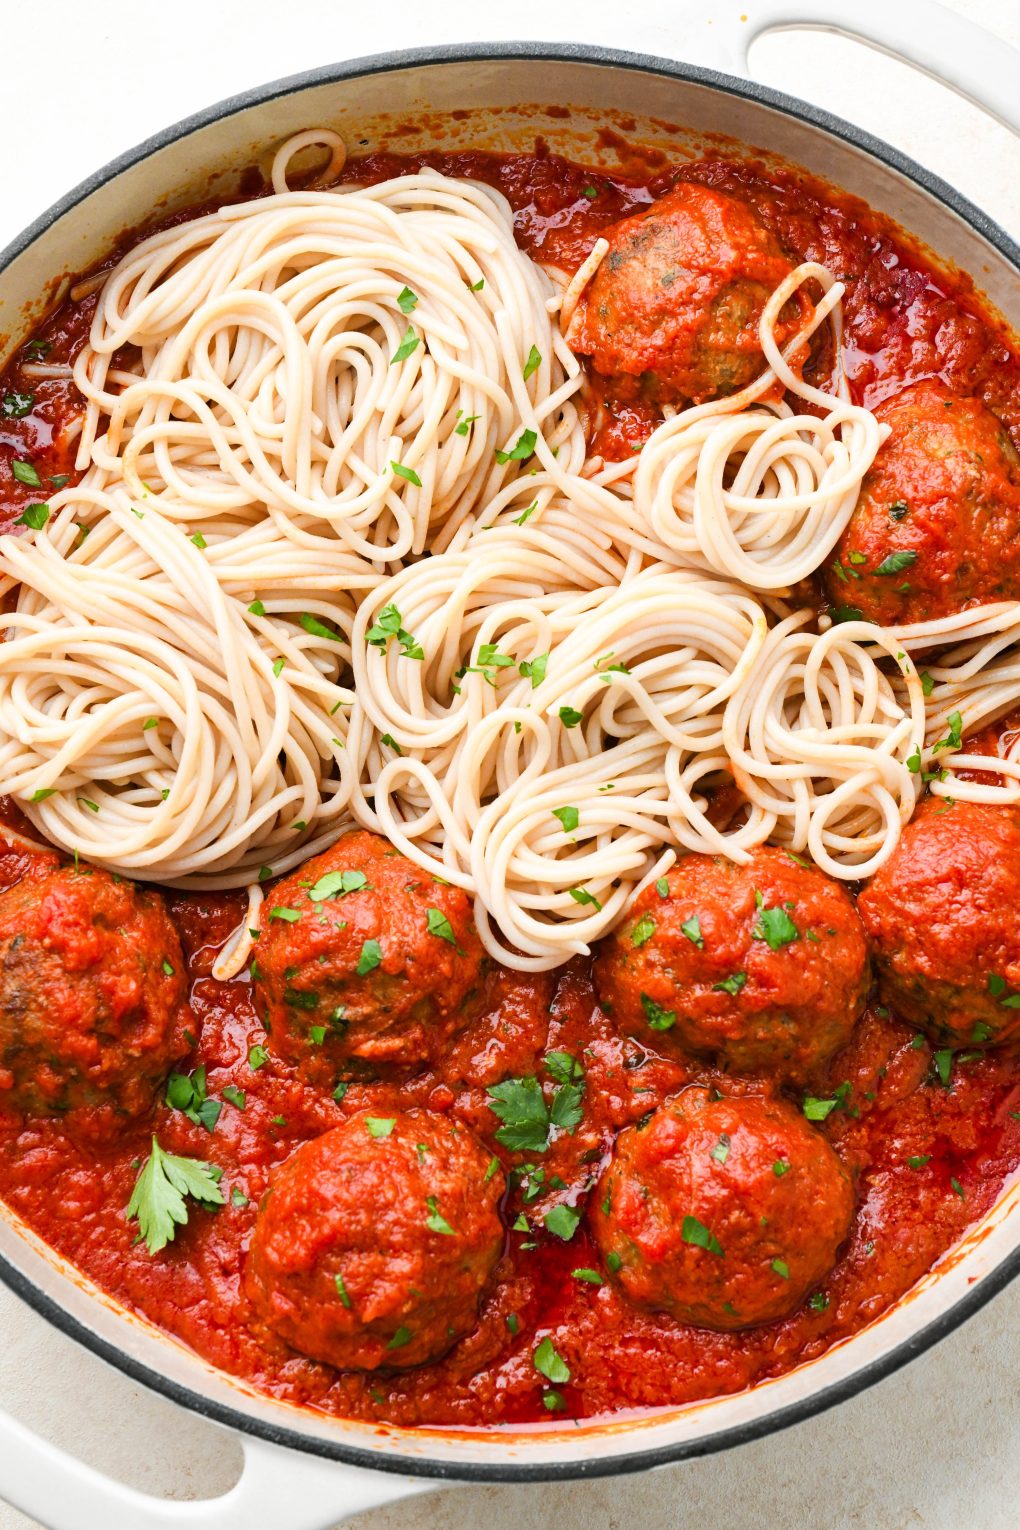 Gluten free meatballs in marinara sauce on one side of a skillet, with spaghetti noodles in the other half of the skillet.